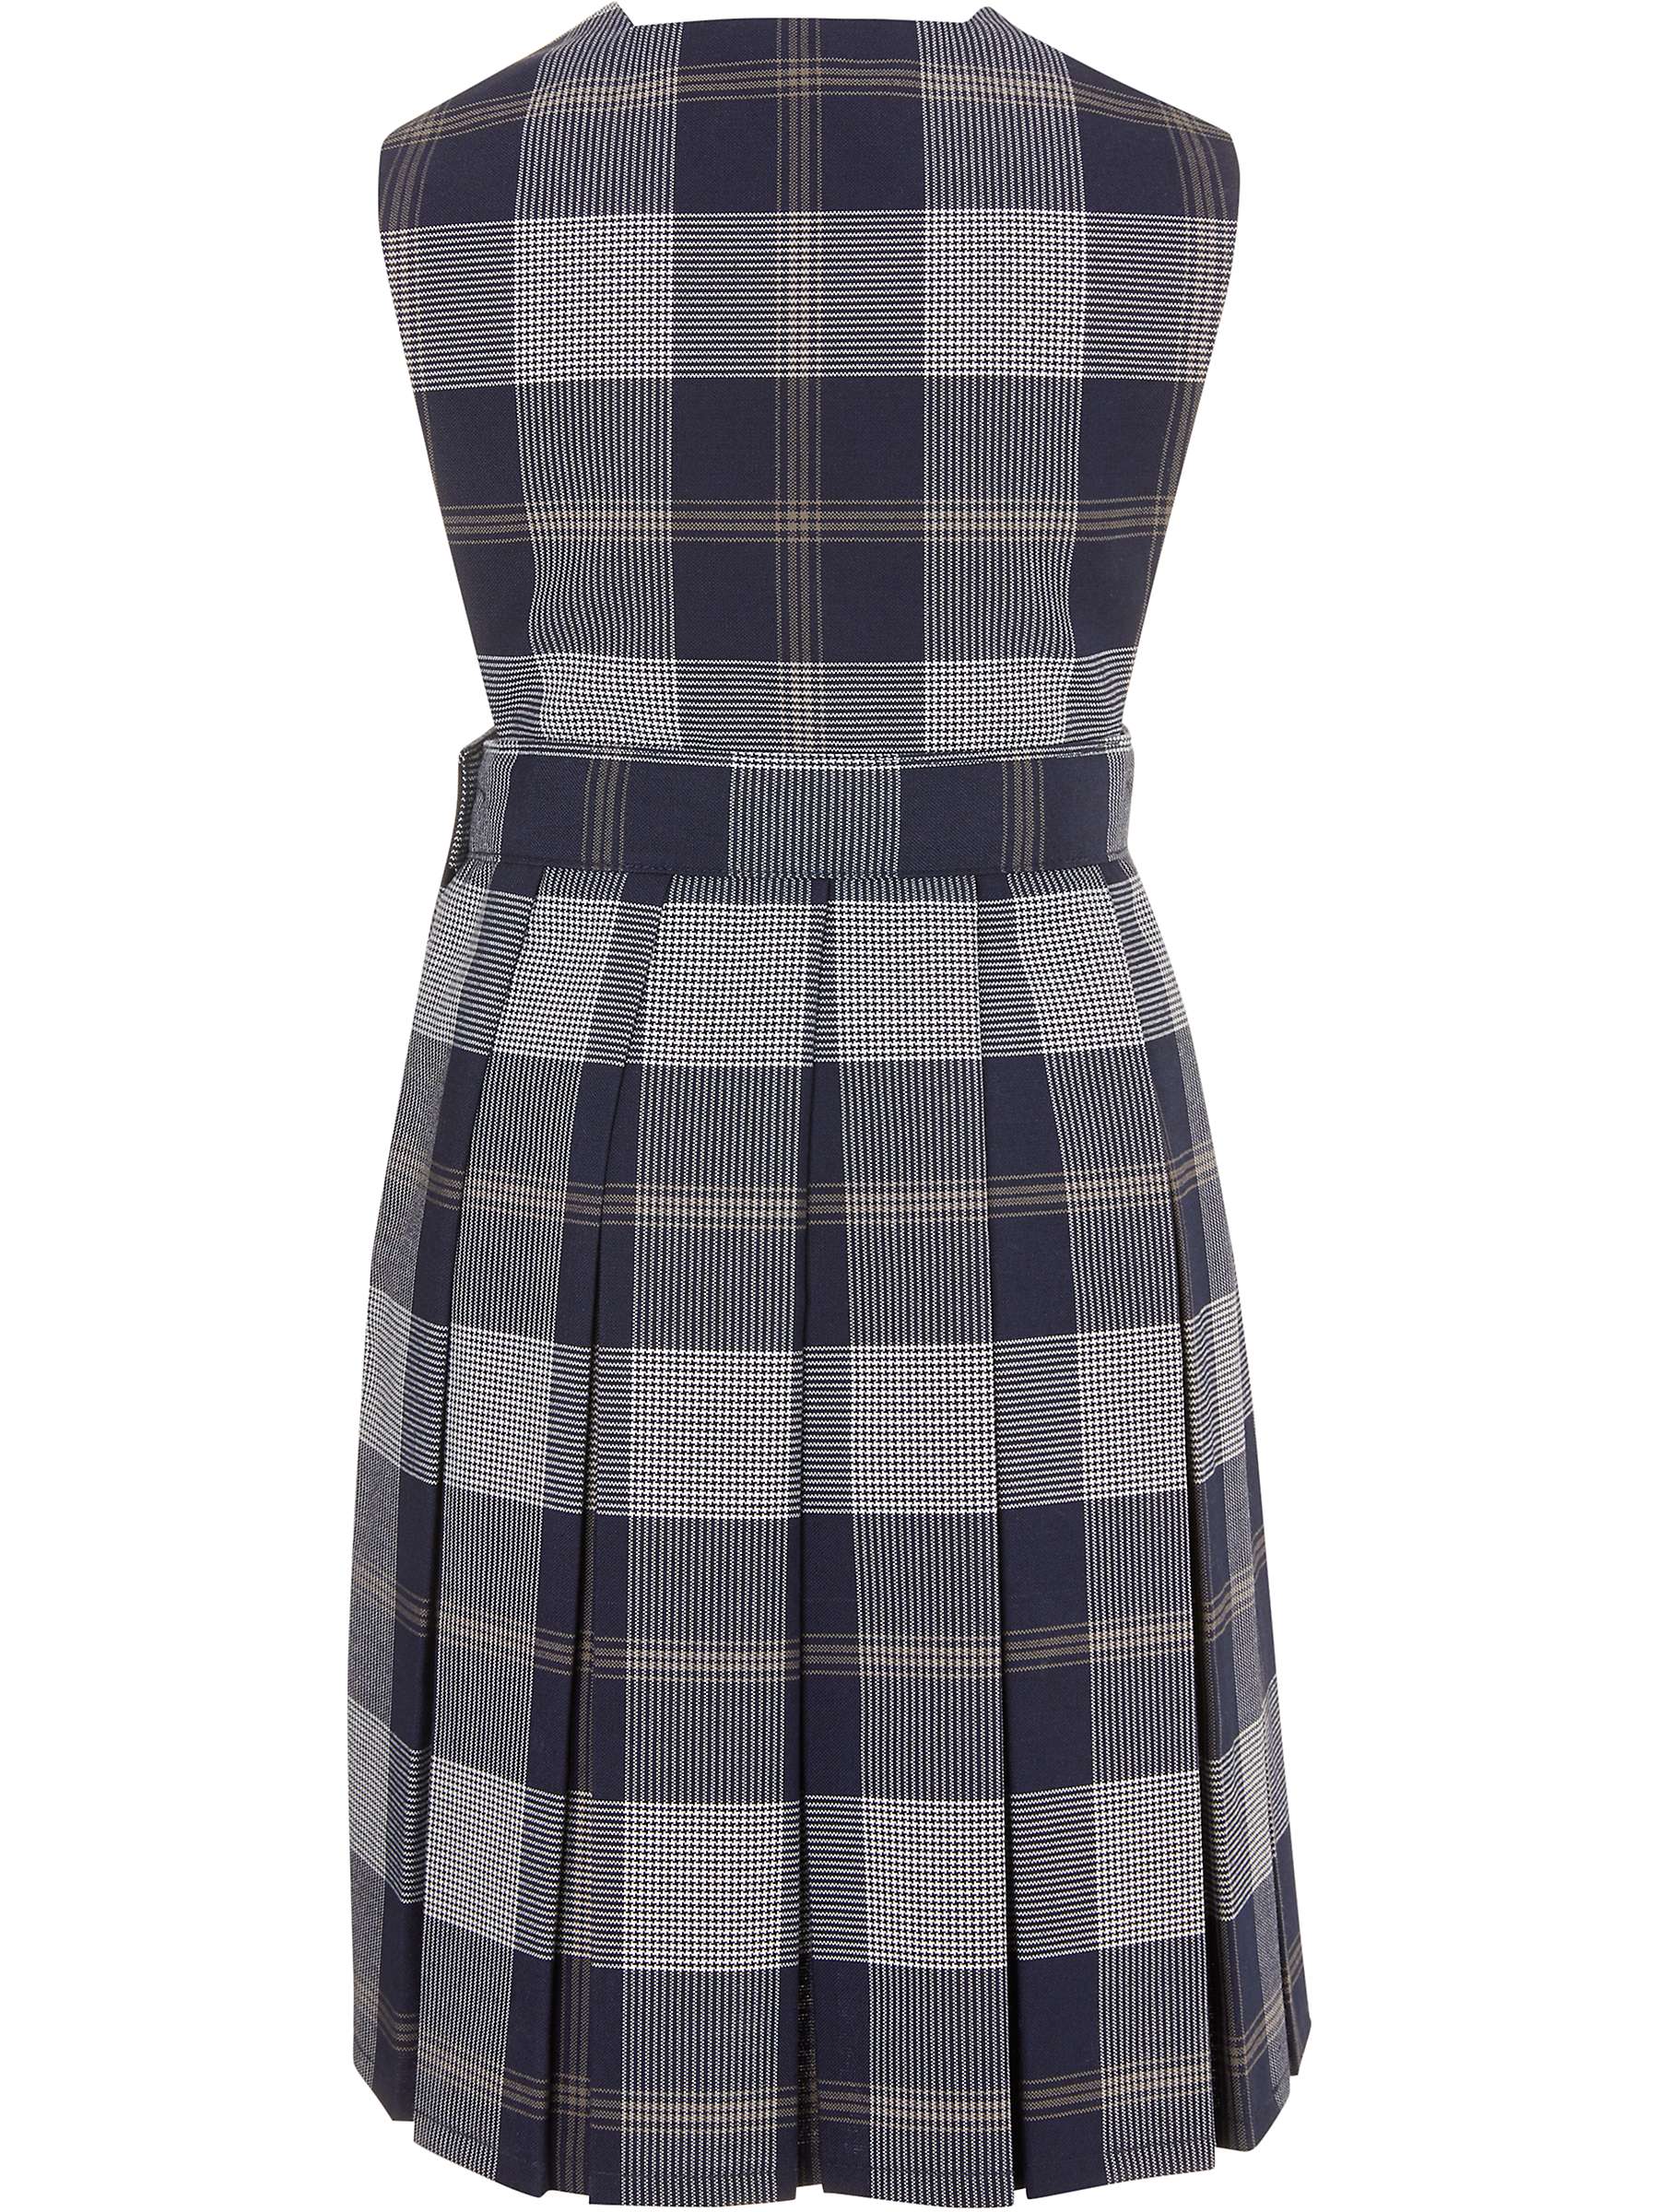 Buy Chigwell School Girls' Pinafore, Blue/White Online at johnlewis.com